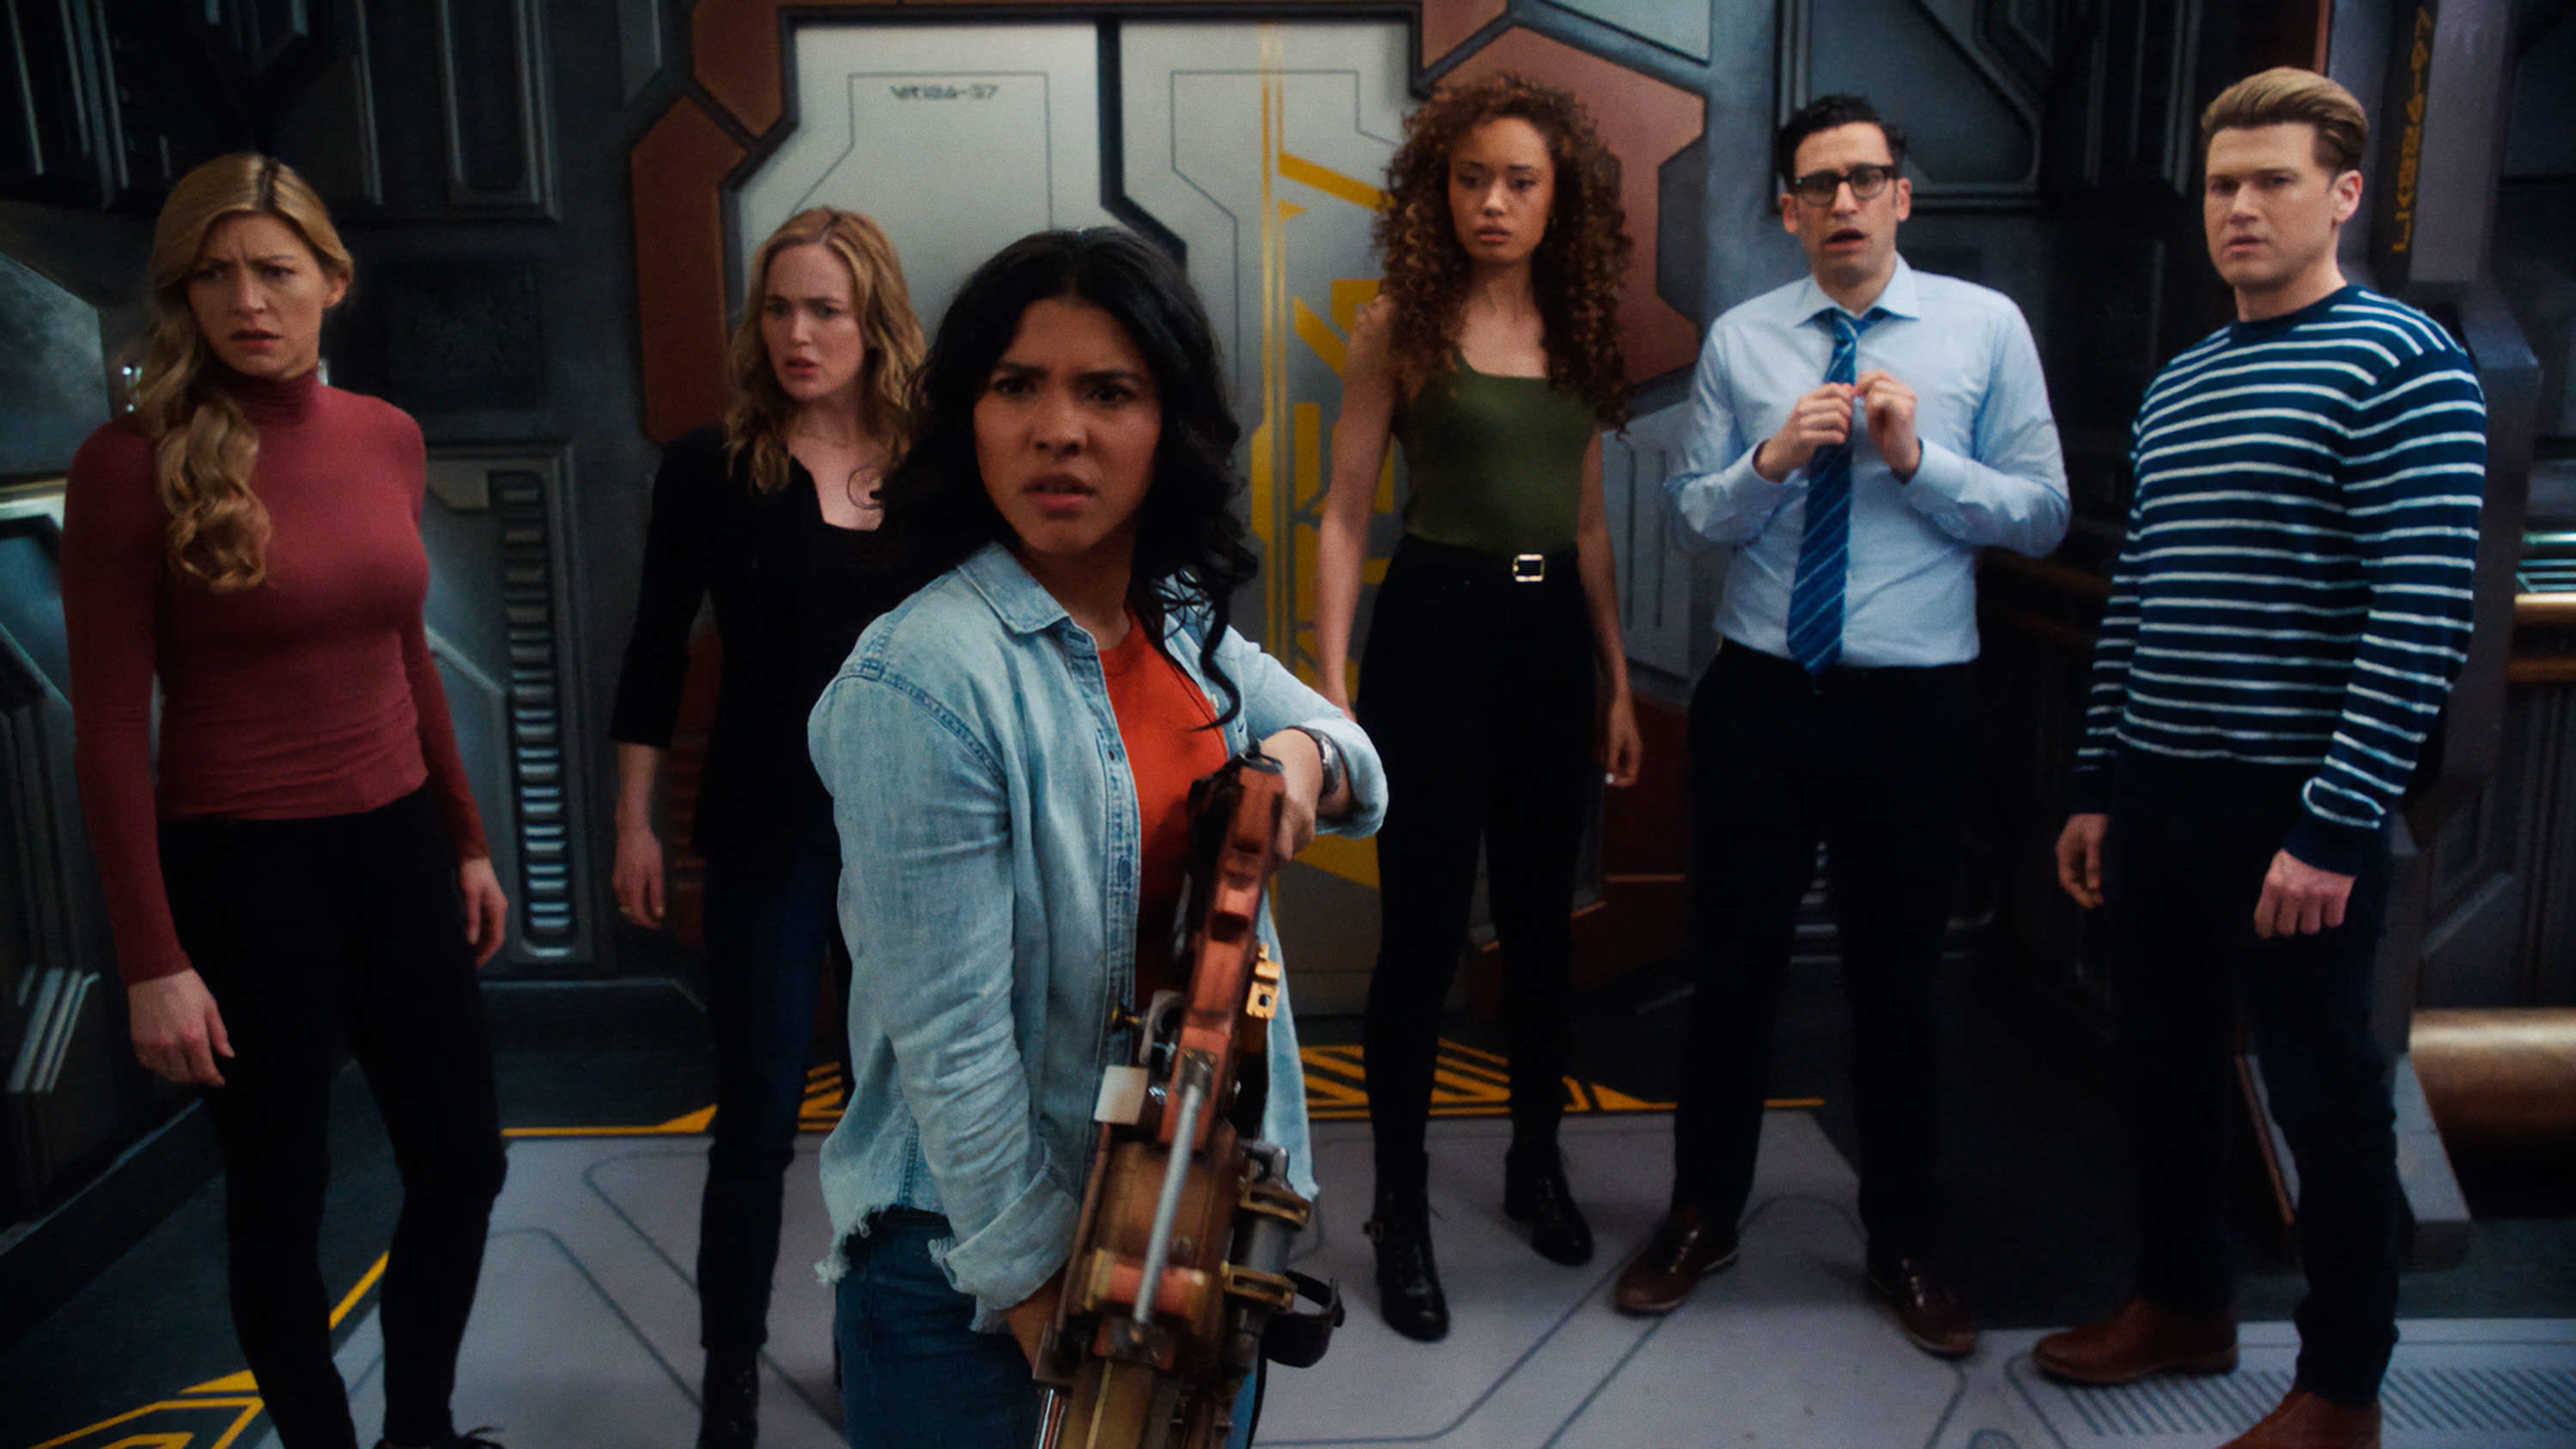 The Legends looking confused at something off camera: from left to right, Ava, Sarah, Spooner holding a gun, Astra, Gary, and Nate